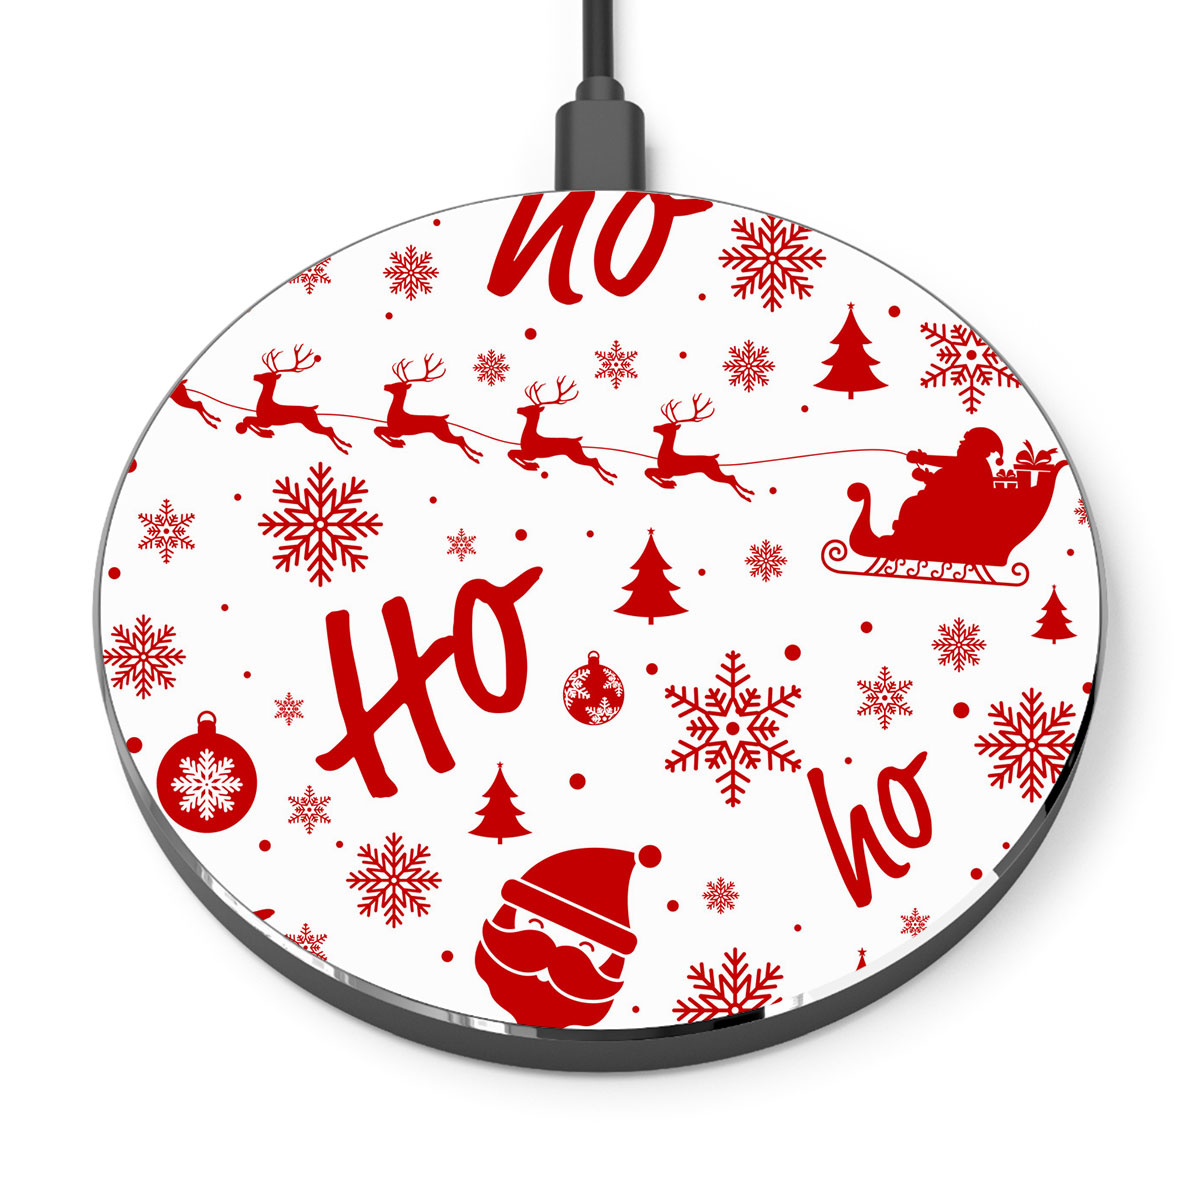 Santa Claus, Santas Reindeer And Christmas Sleigh On The Snowflake Background Printed Wireless Charger